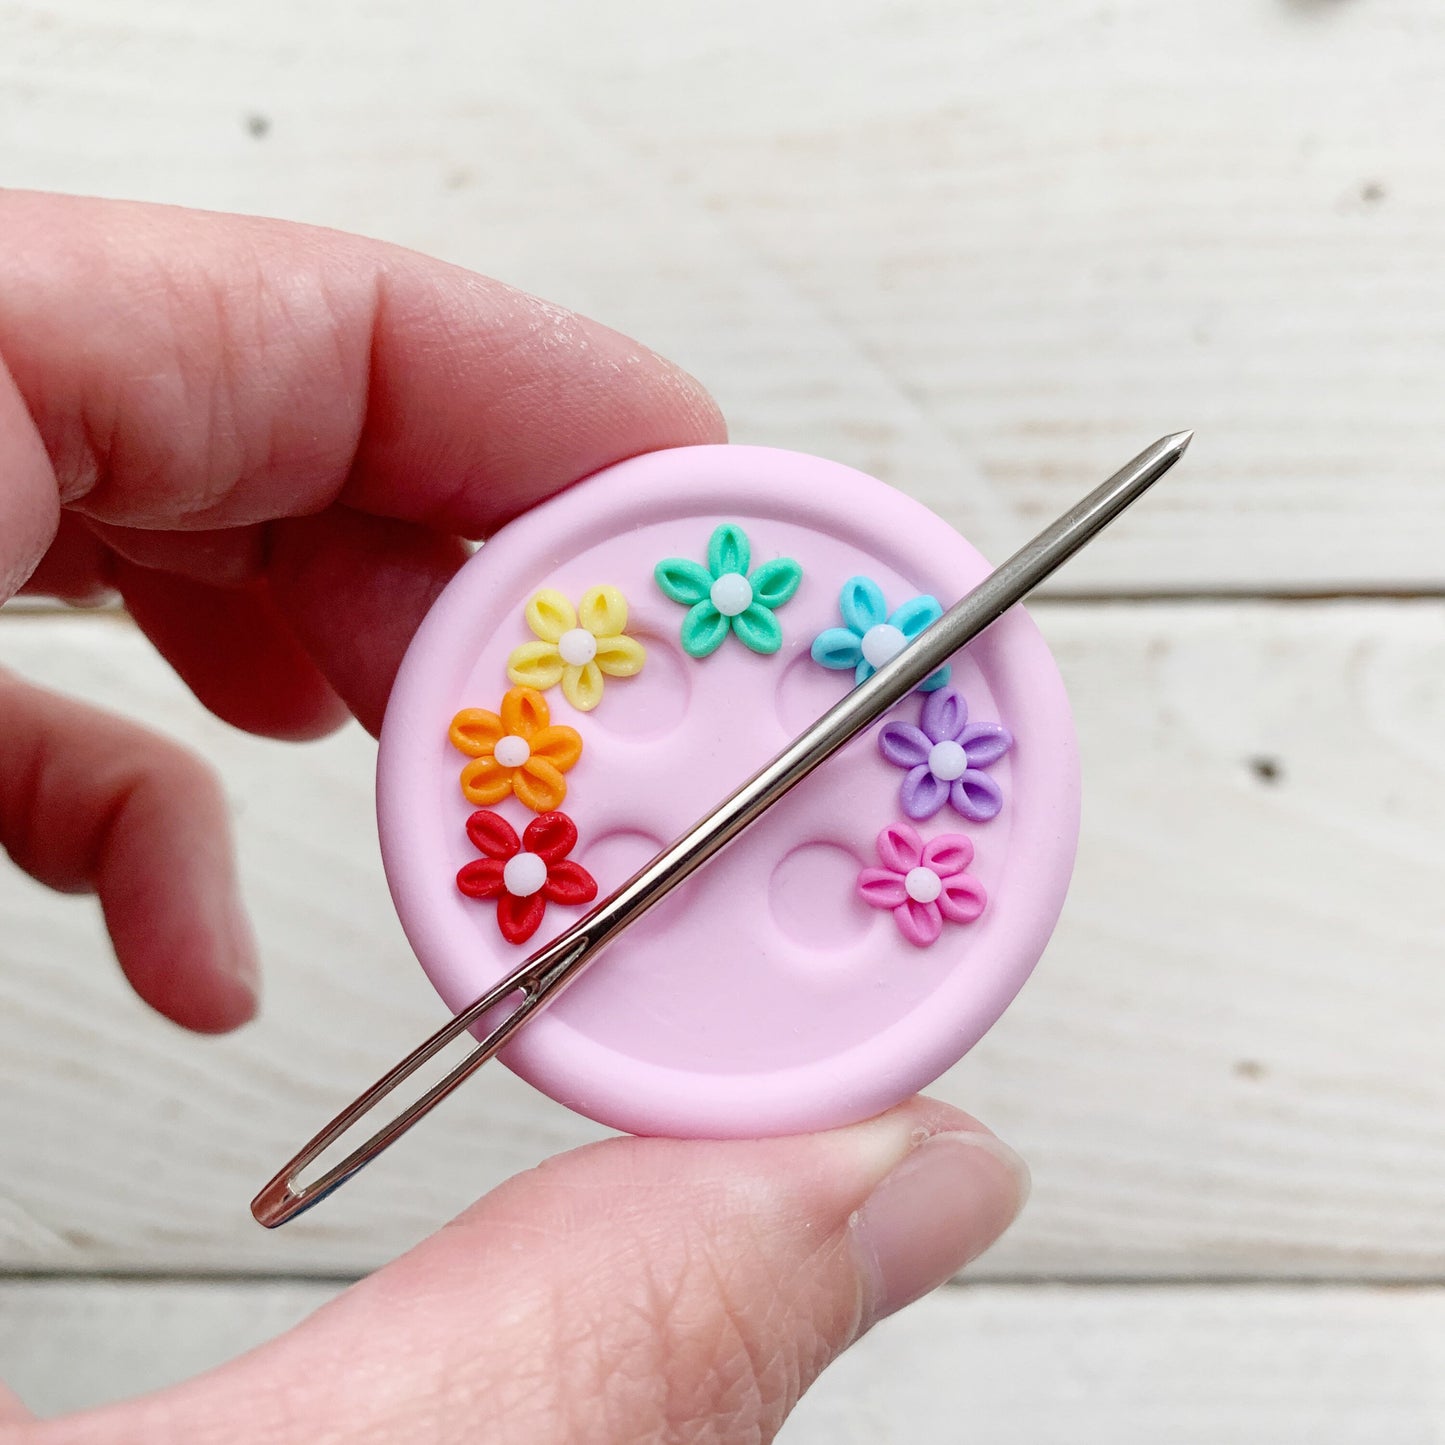 Pink rainbow button magnetic needle minder, needle keeper, sewing accessories